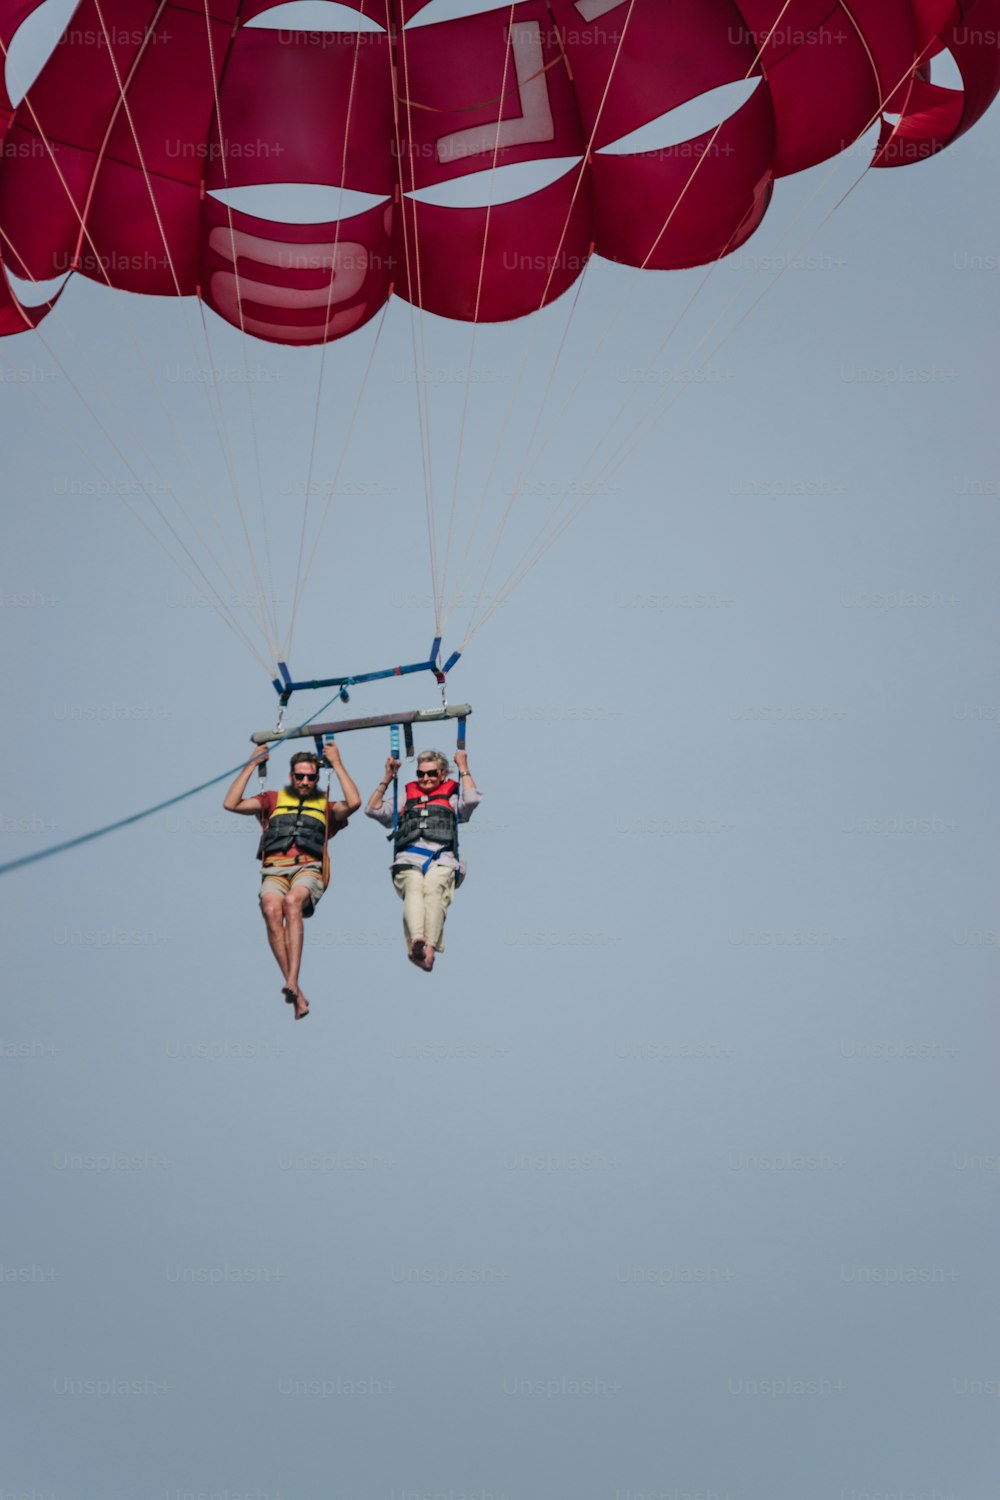 a couple of people riding on top of a parachute